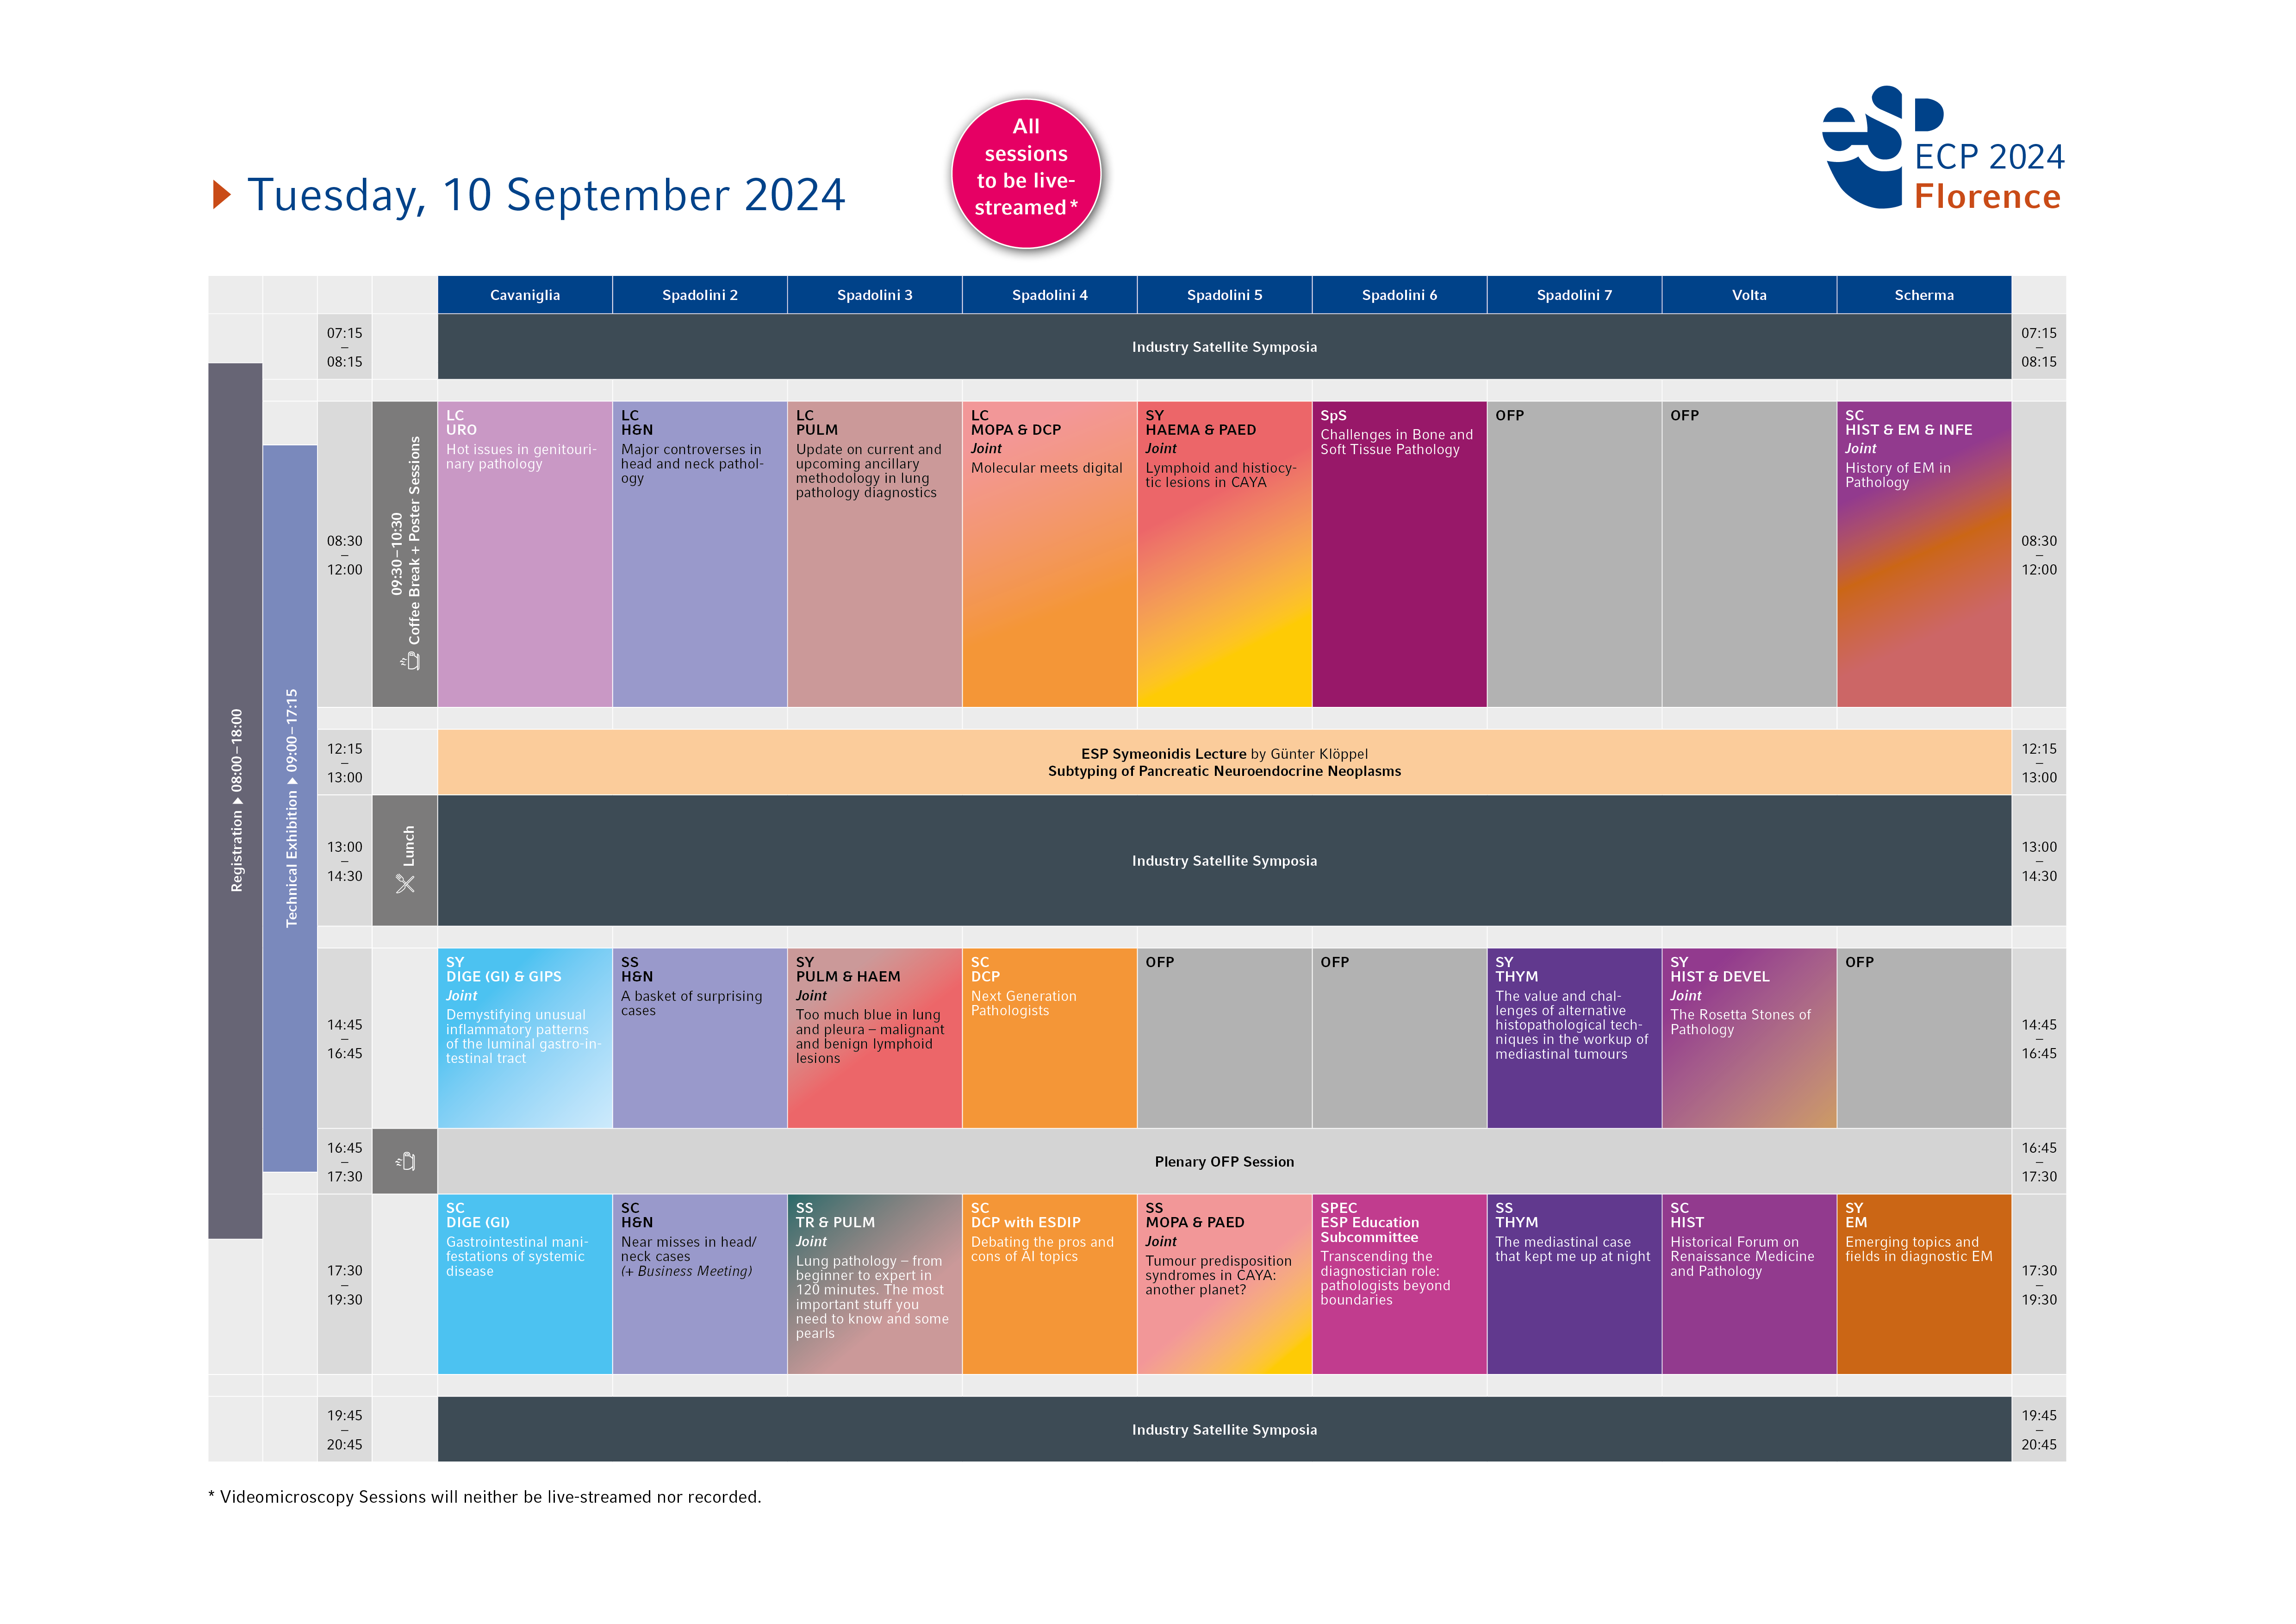 Programme Schedule - Tuesday, 10 September 2024